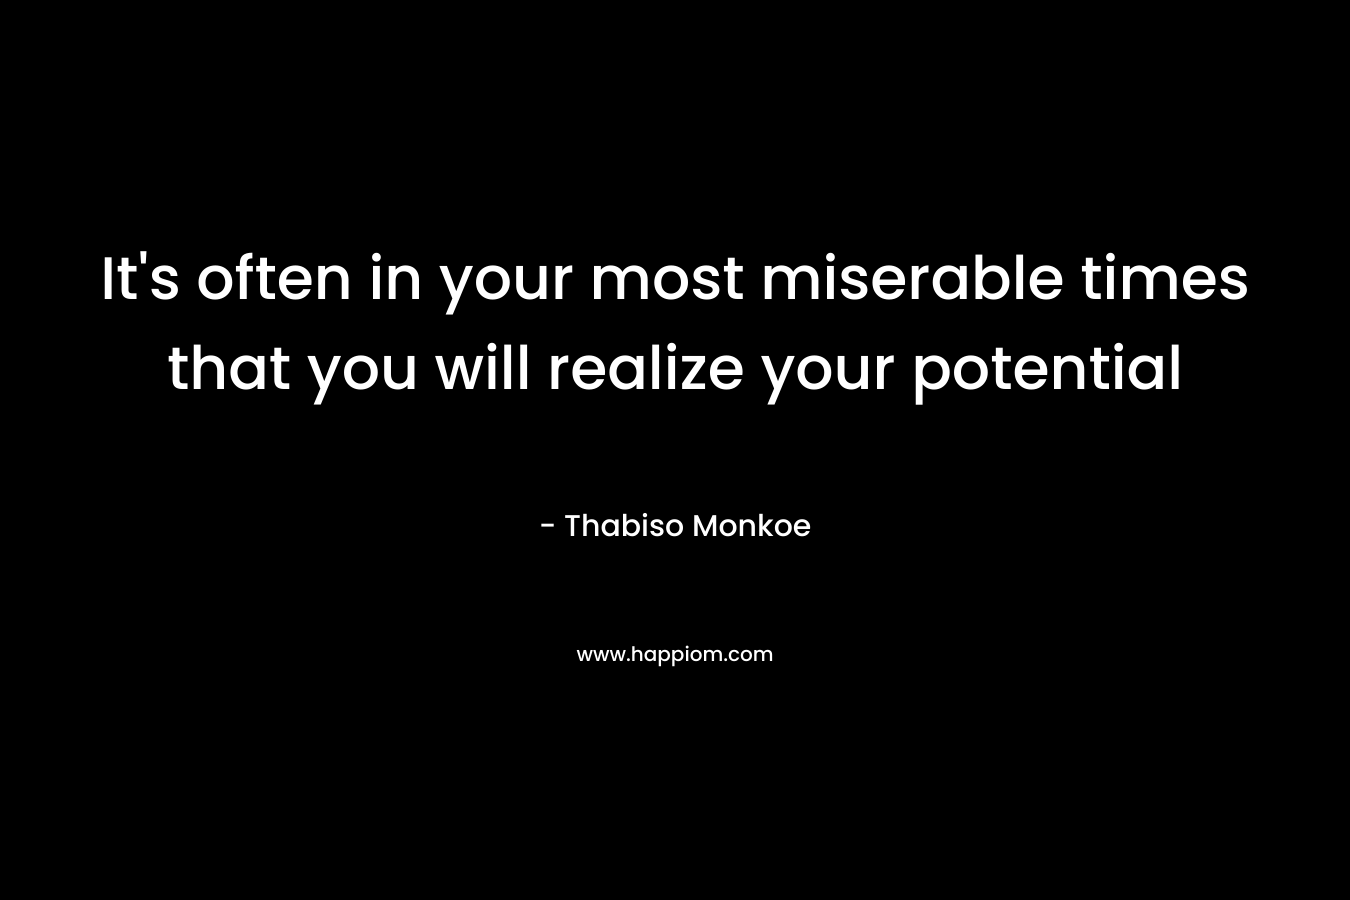 It's often in your most miserable times that you will realize your potential